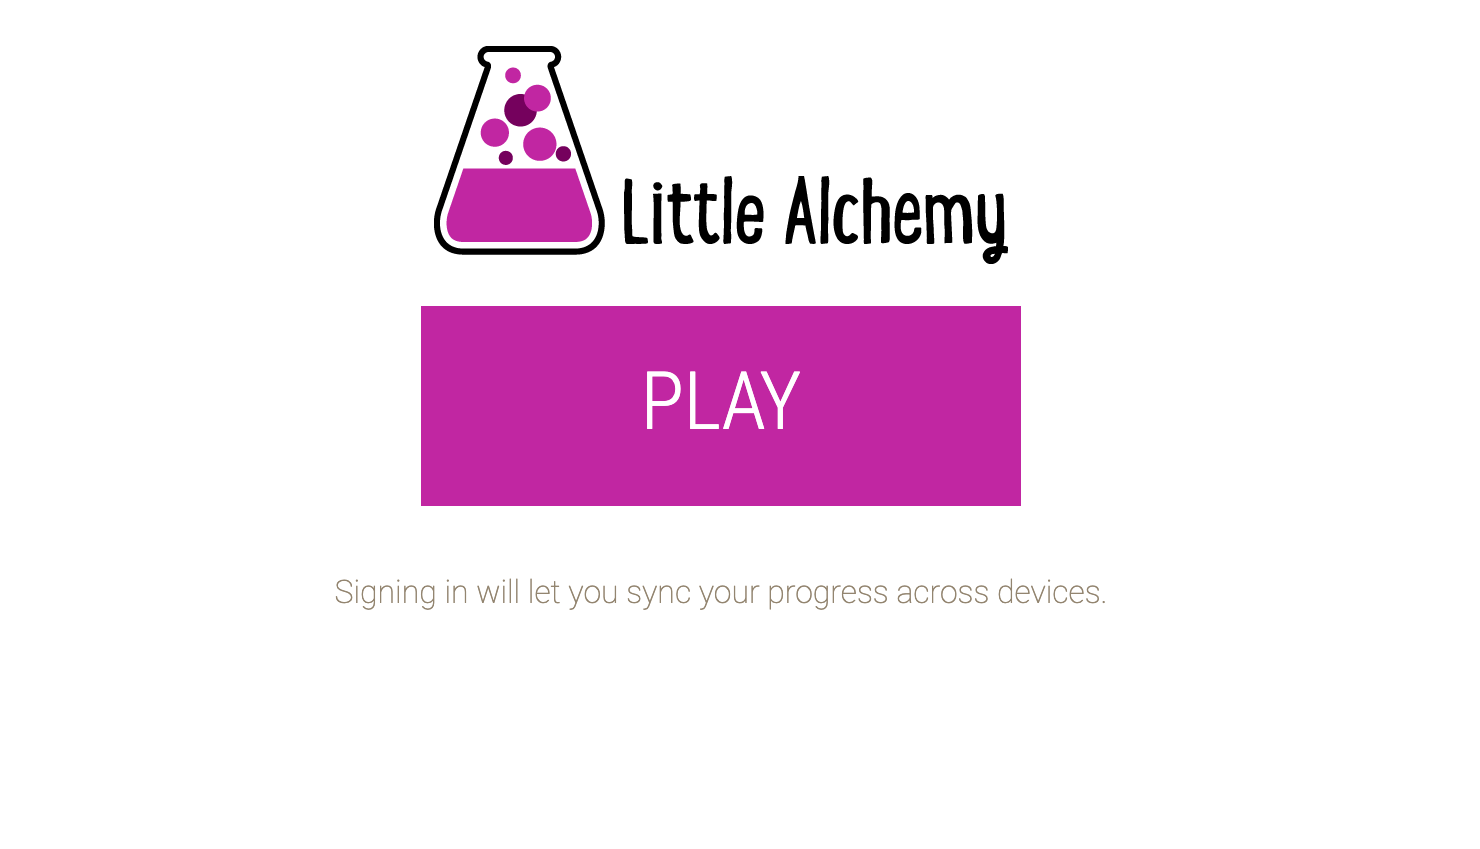 Opening window of little alchemy game